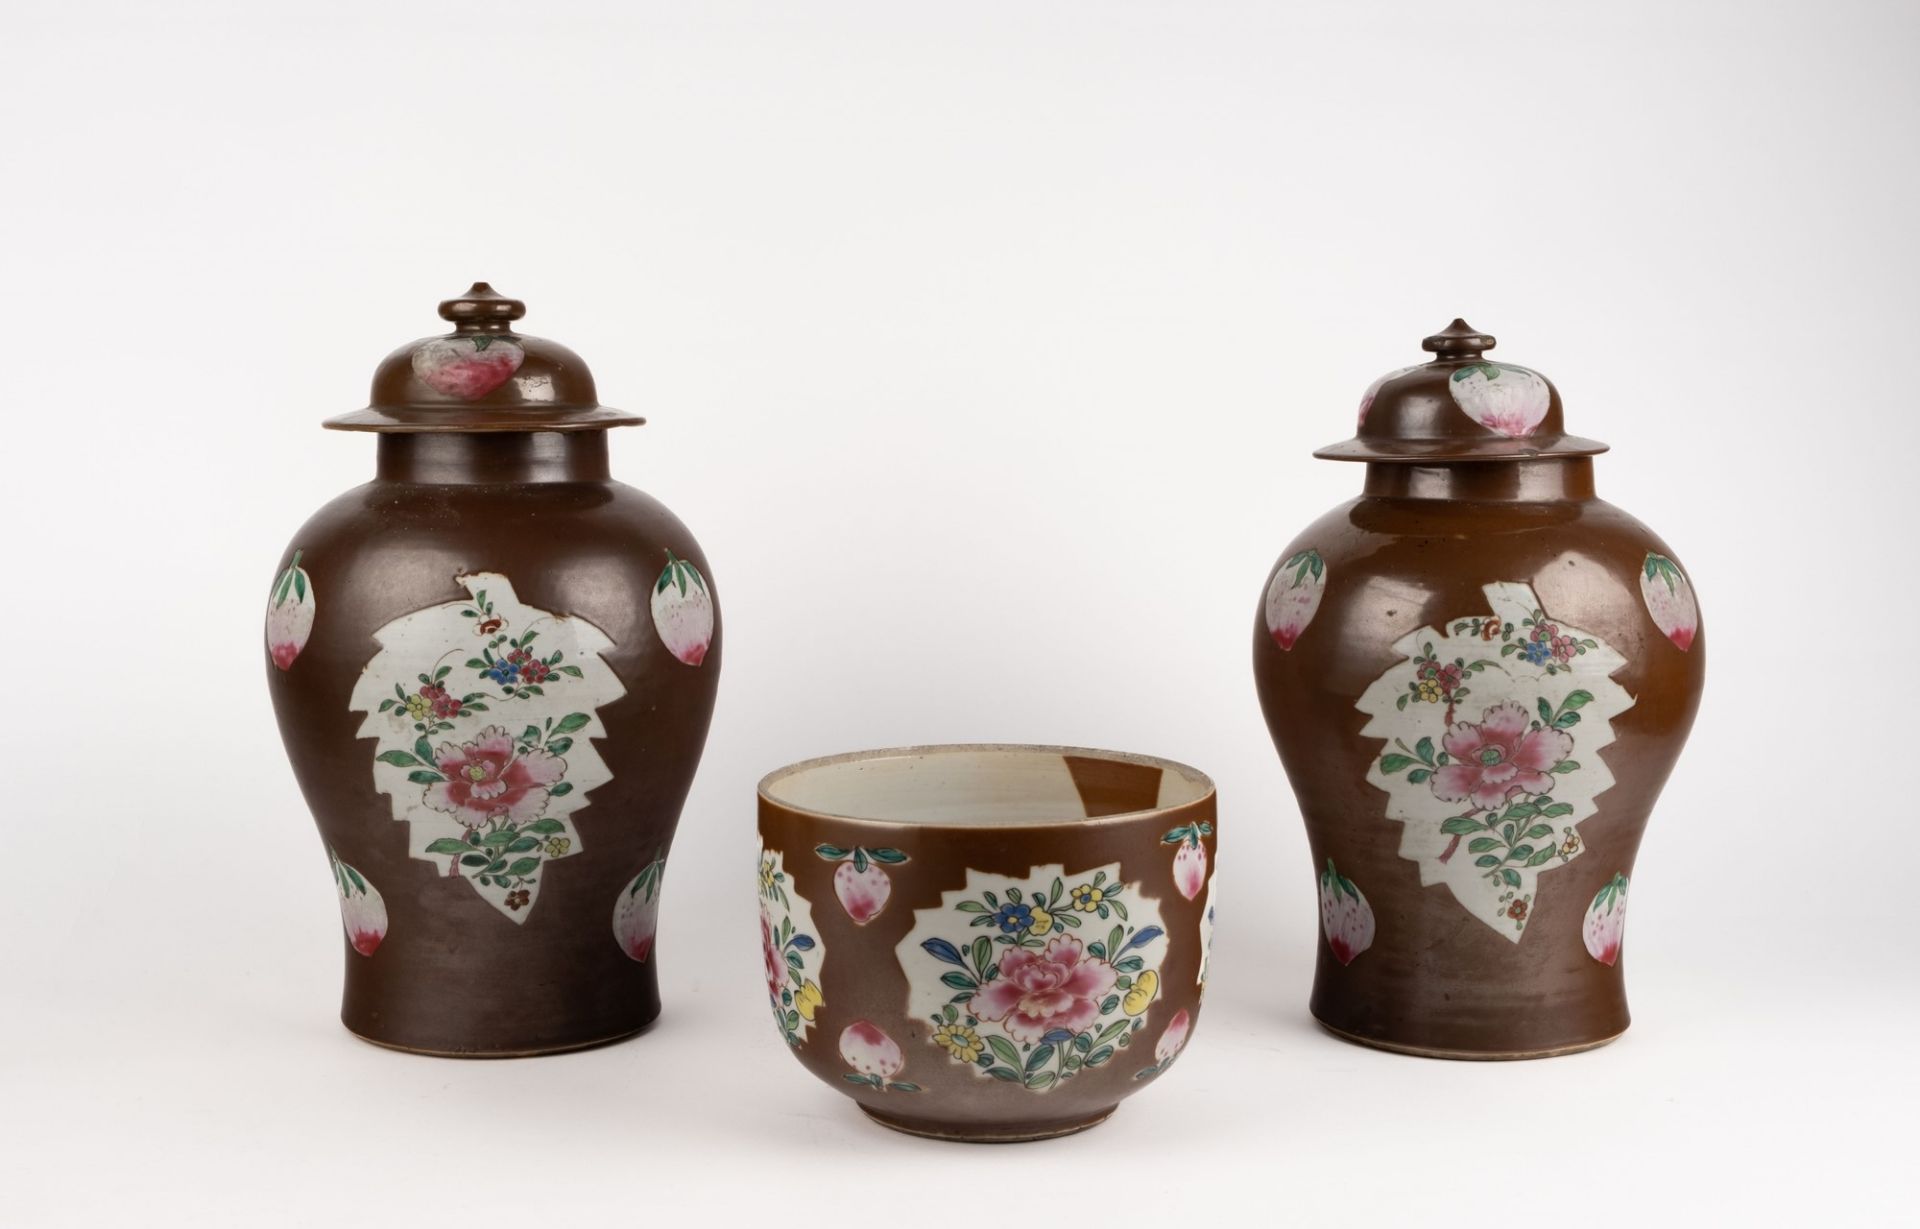 Two vases with cover "Cafè au lait" and a bowl. China, 19th c.